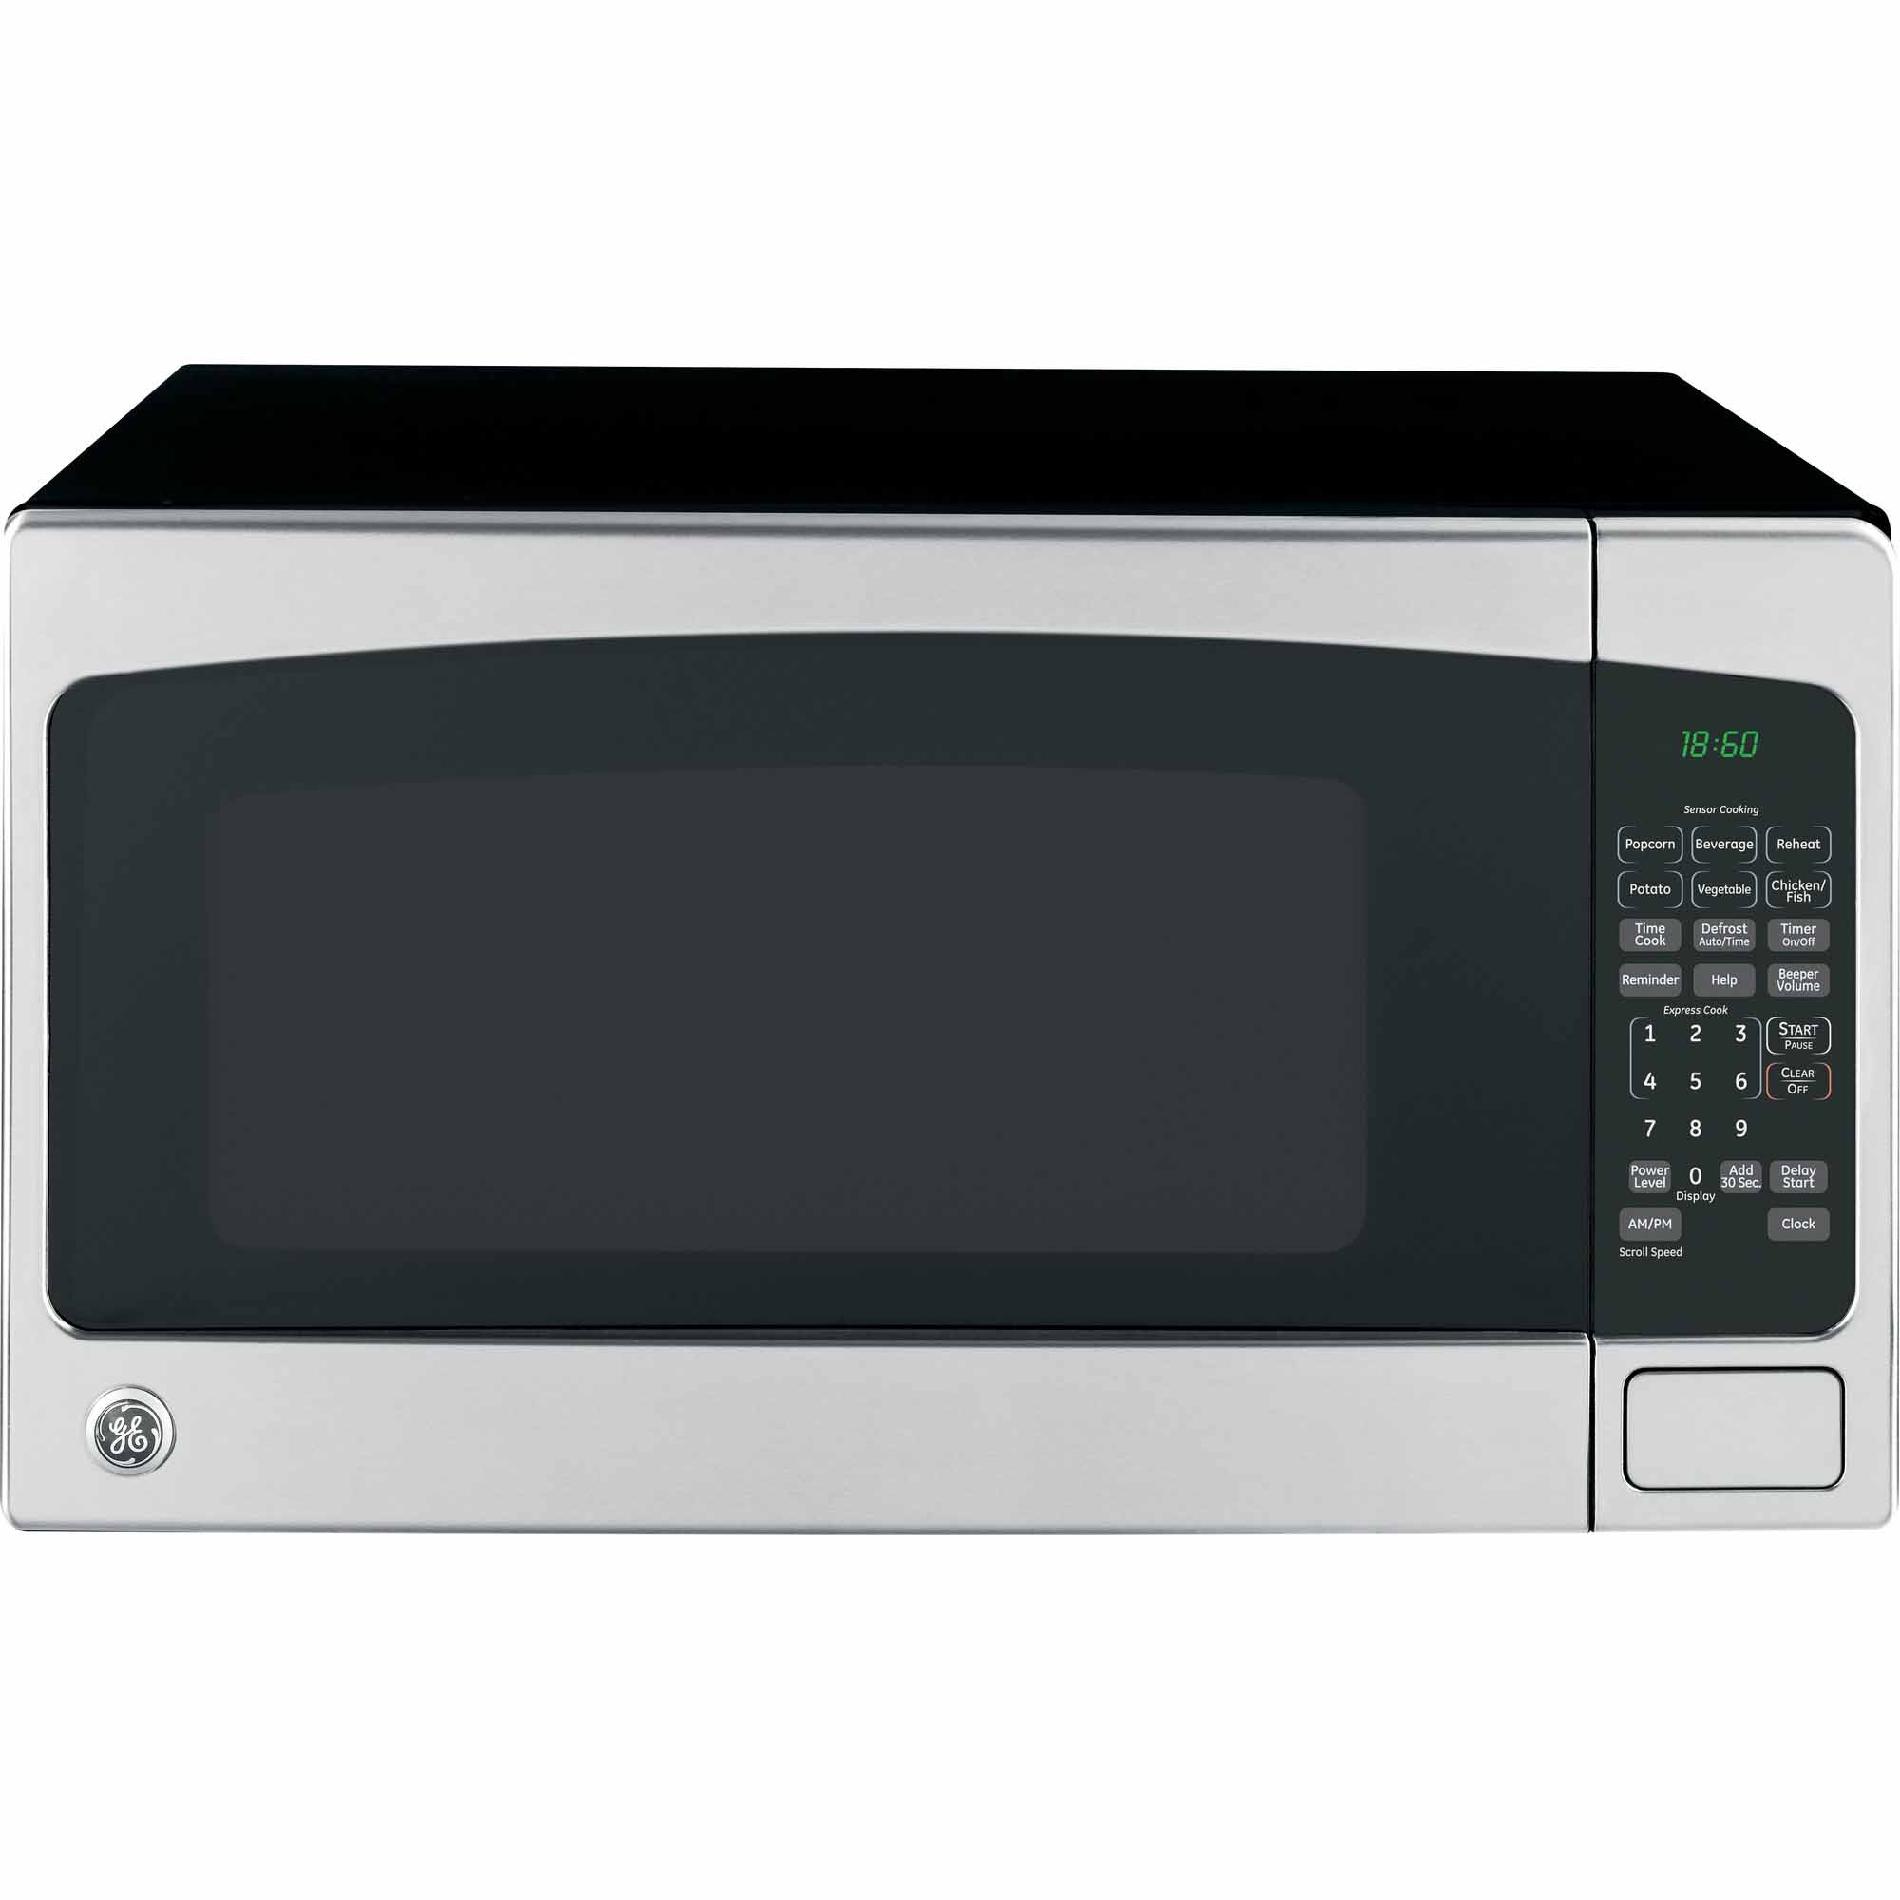 GE Appliances JES2051SNSS 2.0 cu. ft. Countertop Microwave Oven